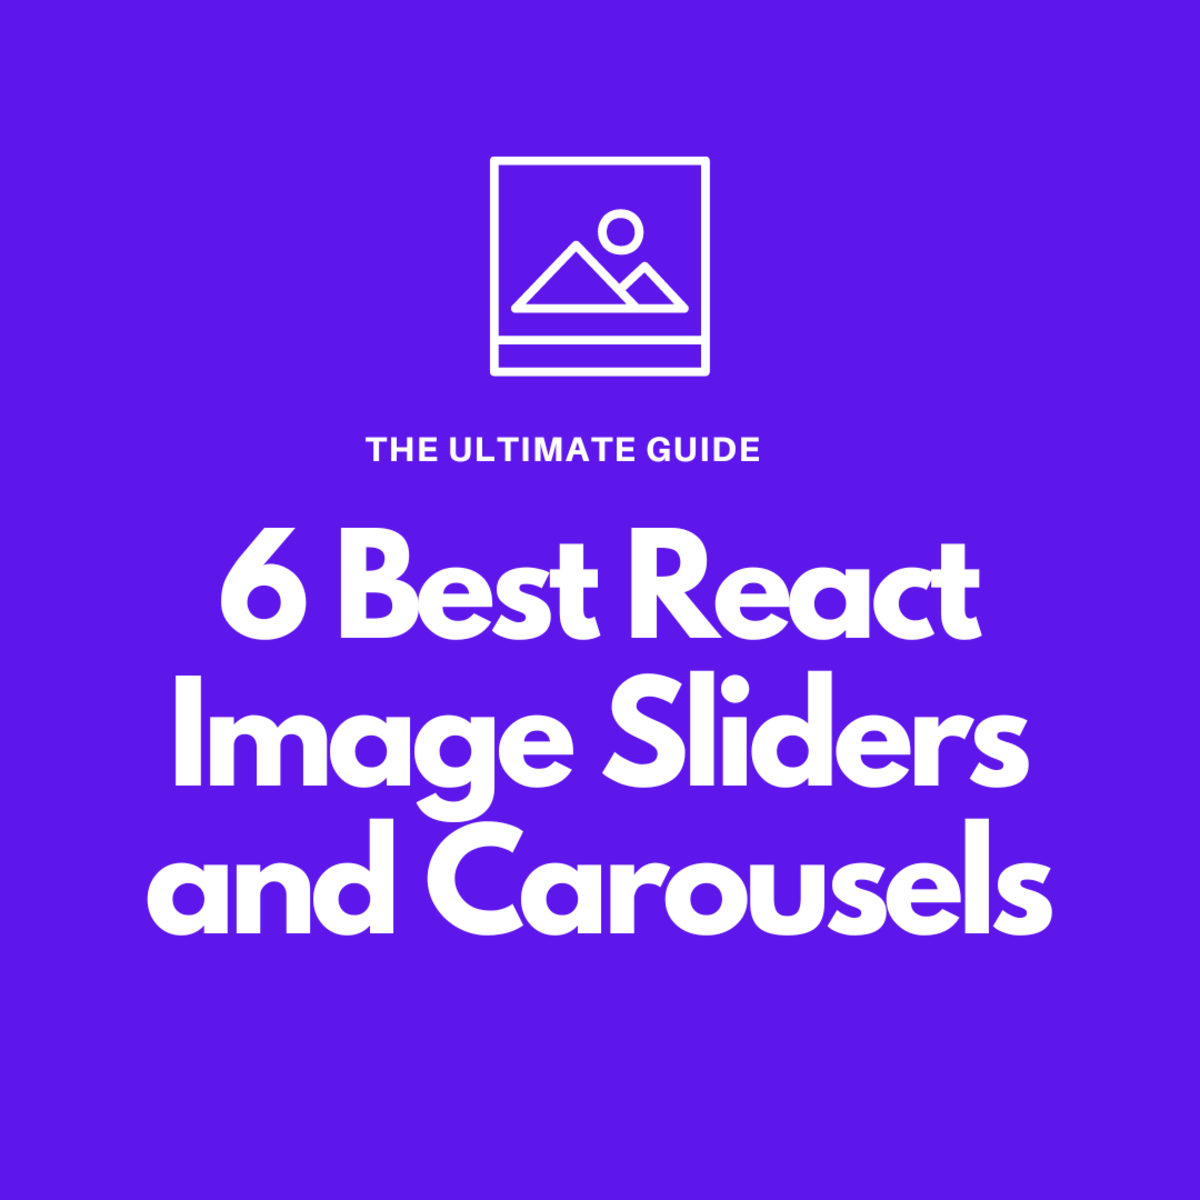 Discover the best React image sliders and libraries in this ultimate list!